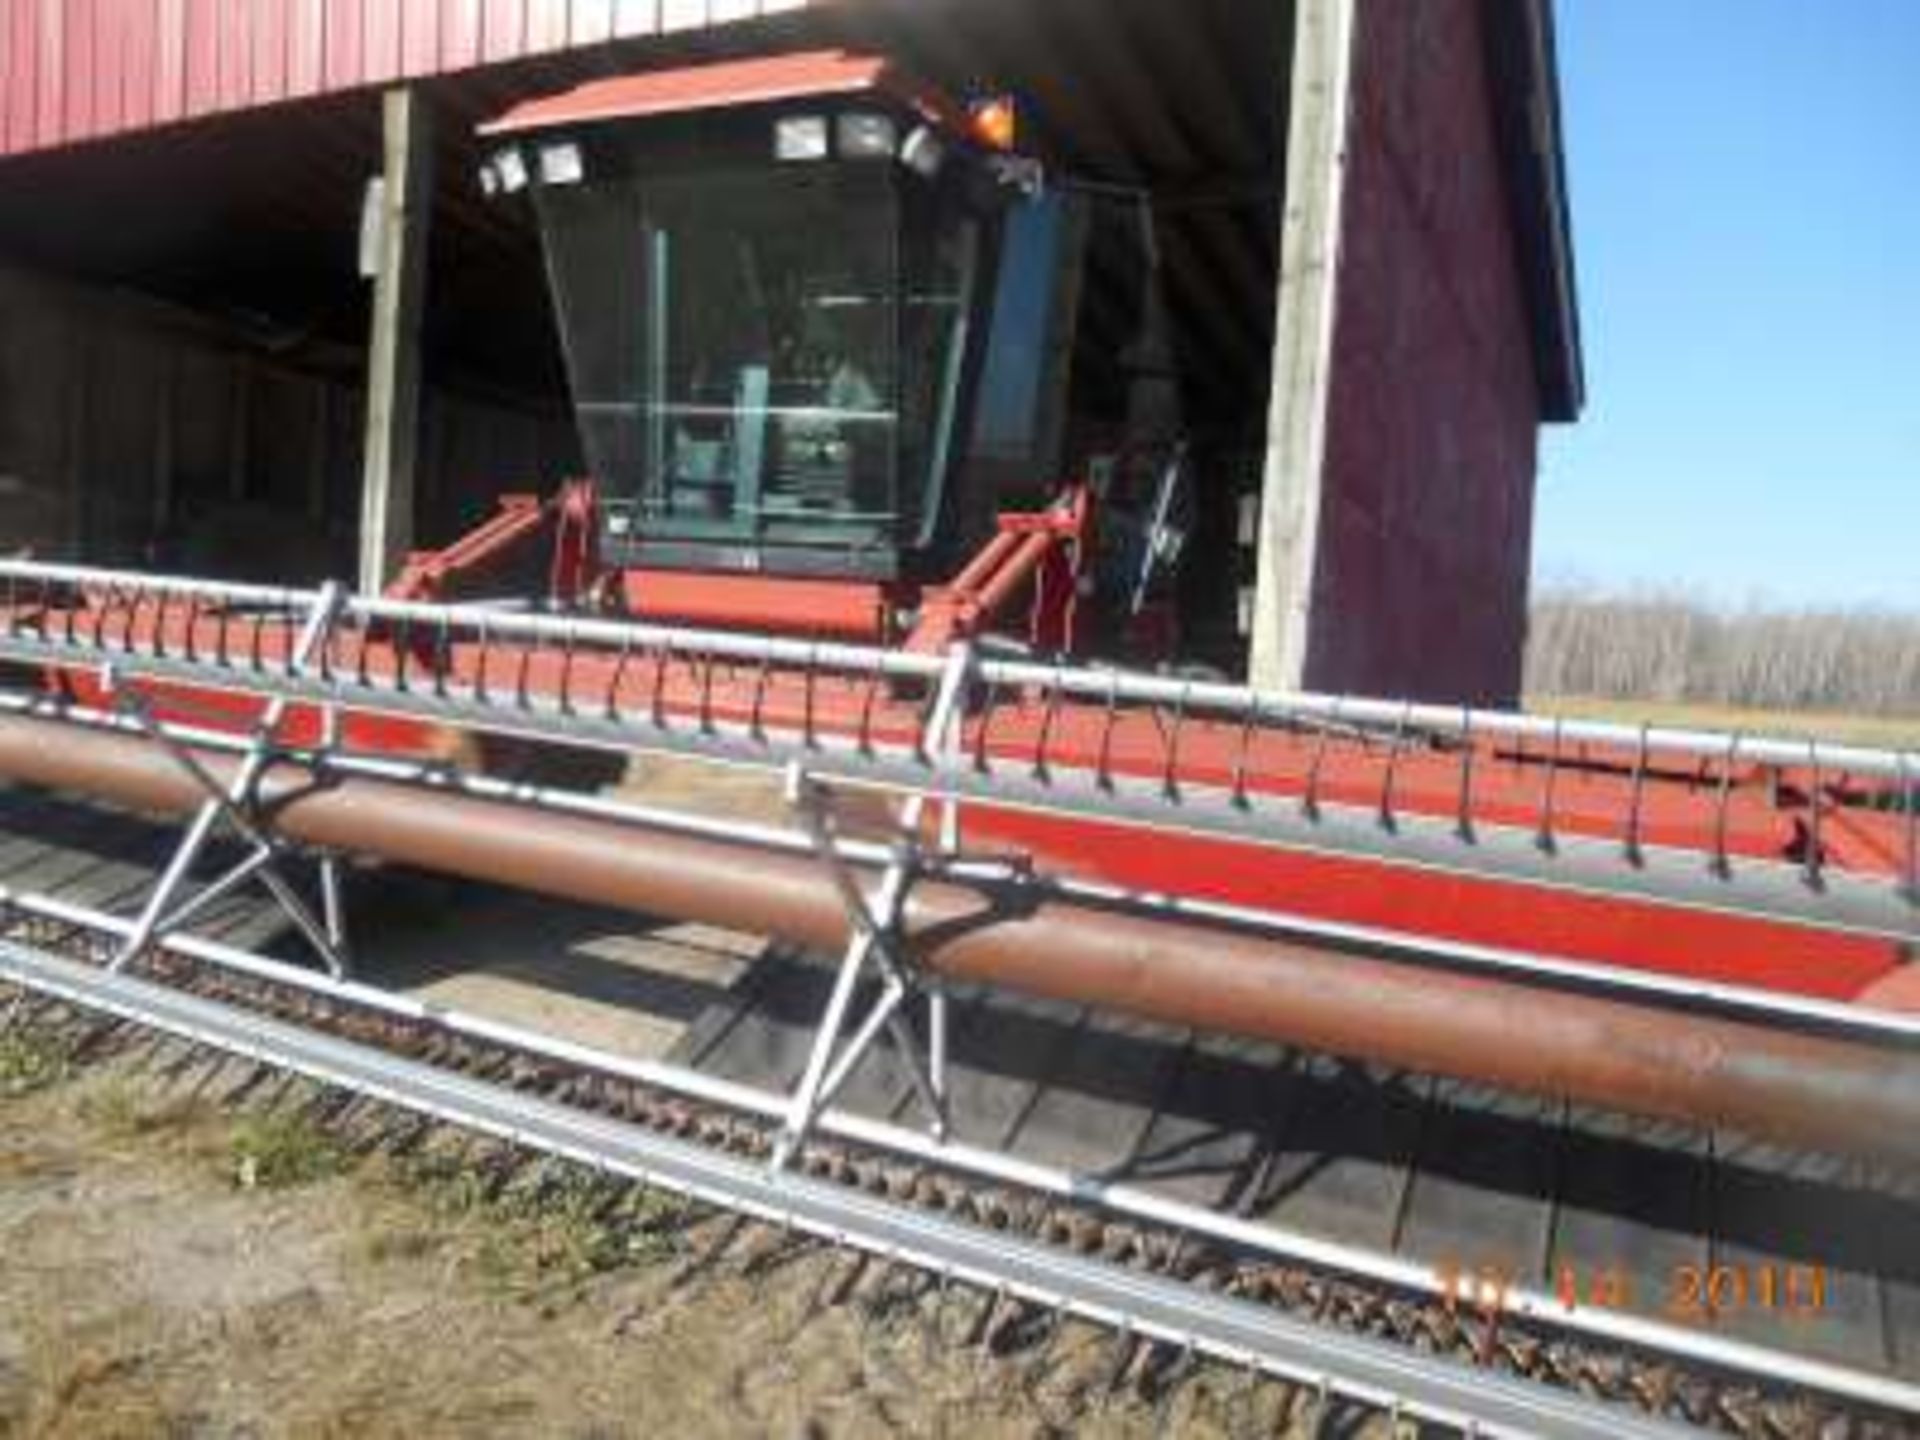 1995 Case IH SP 8820 Swather: diesel, 25ft shifting table, pick up reel, 2900 hours – real nice - Image 3 of 4